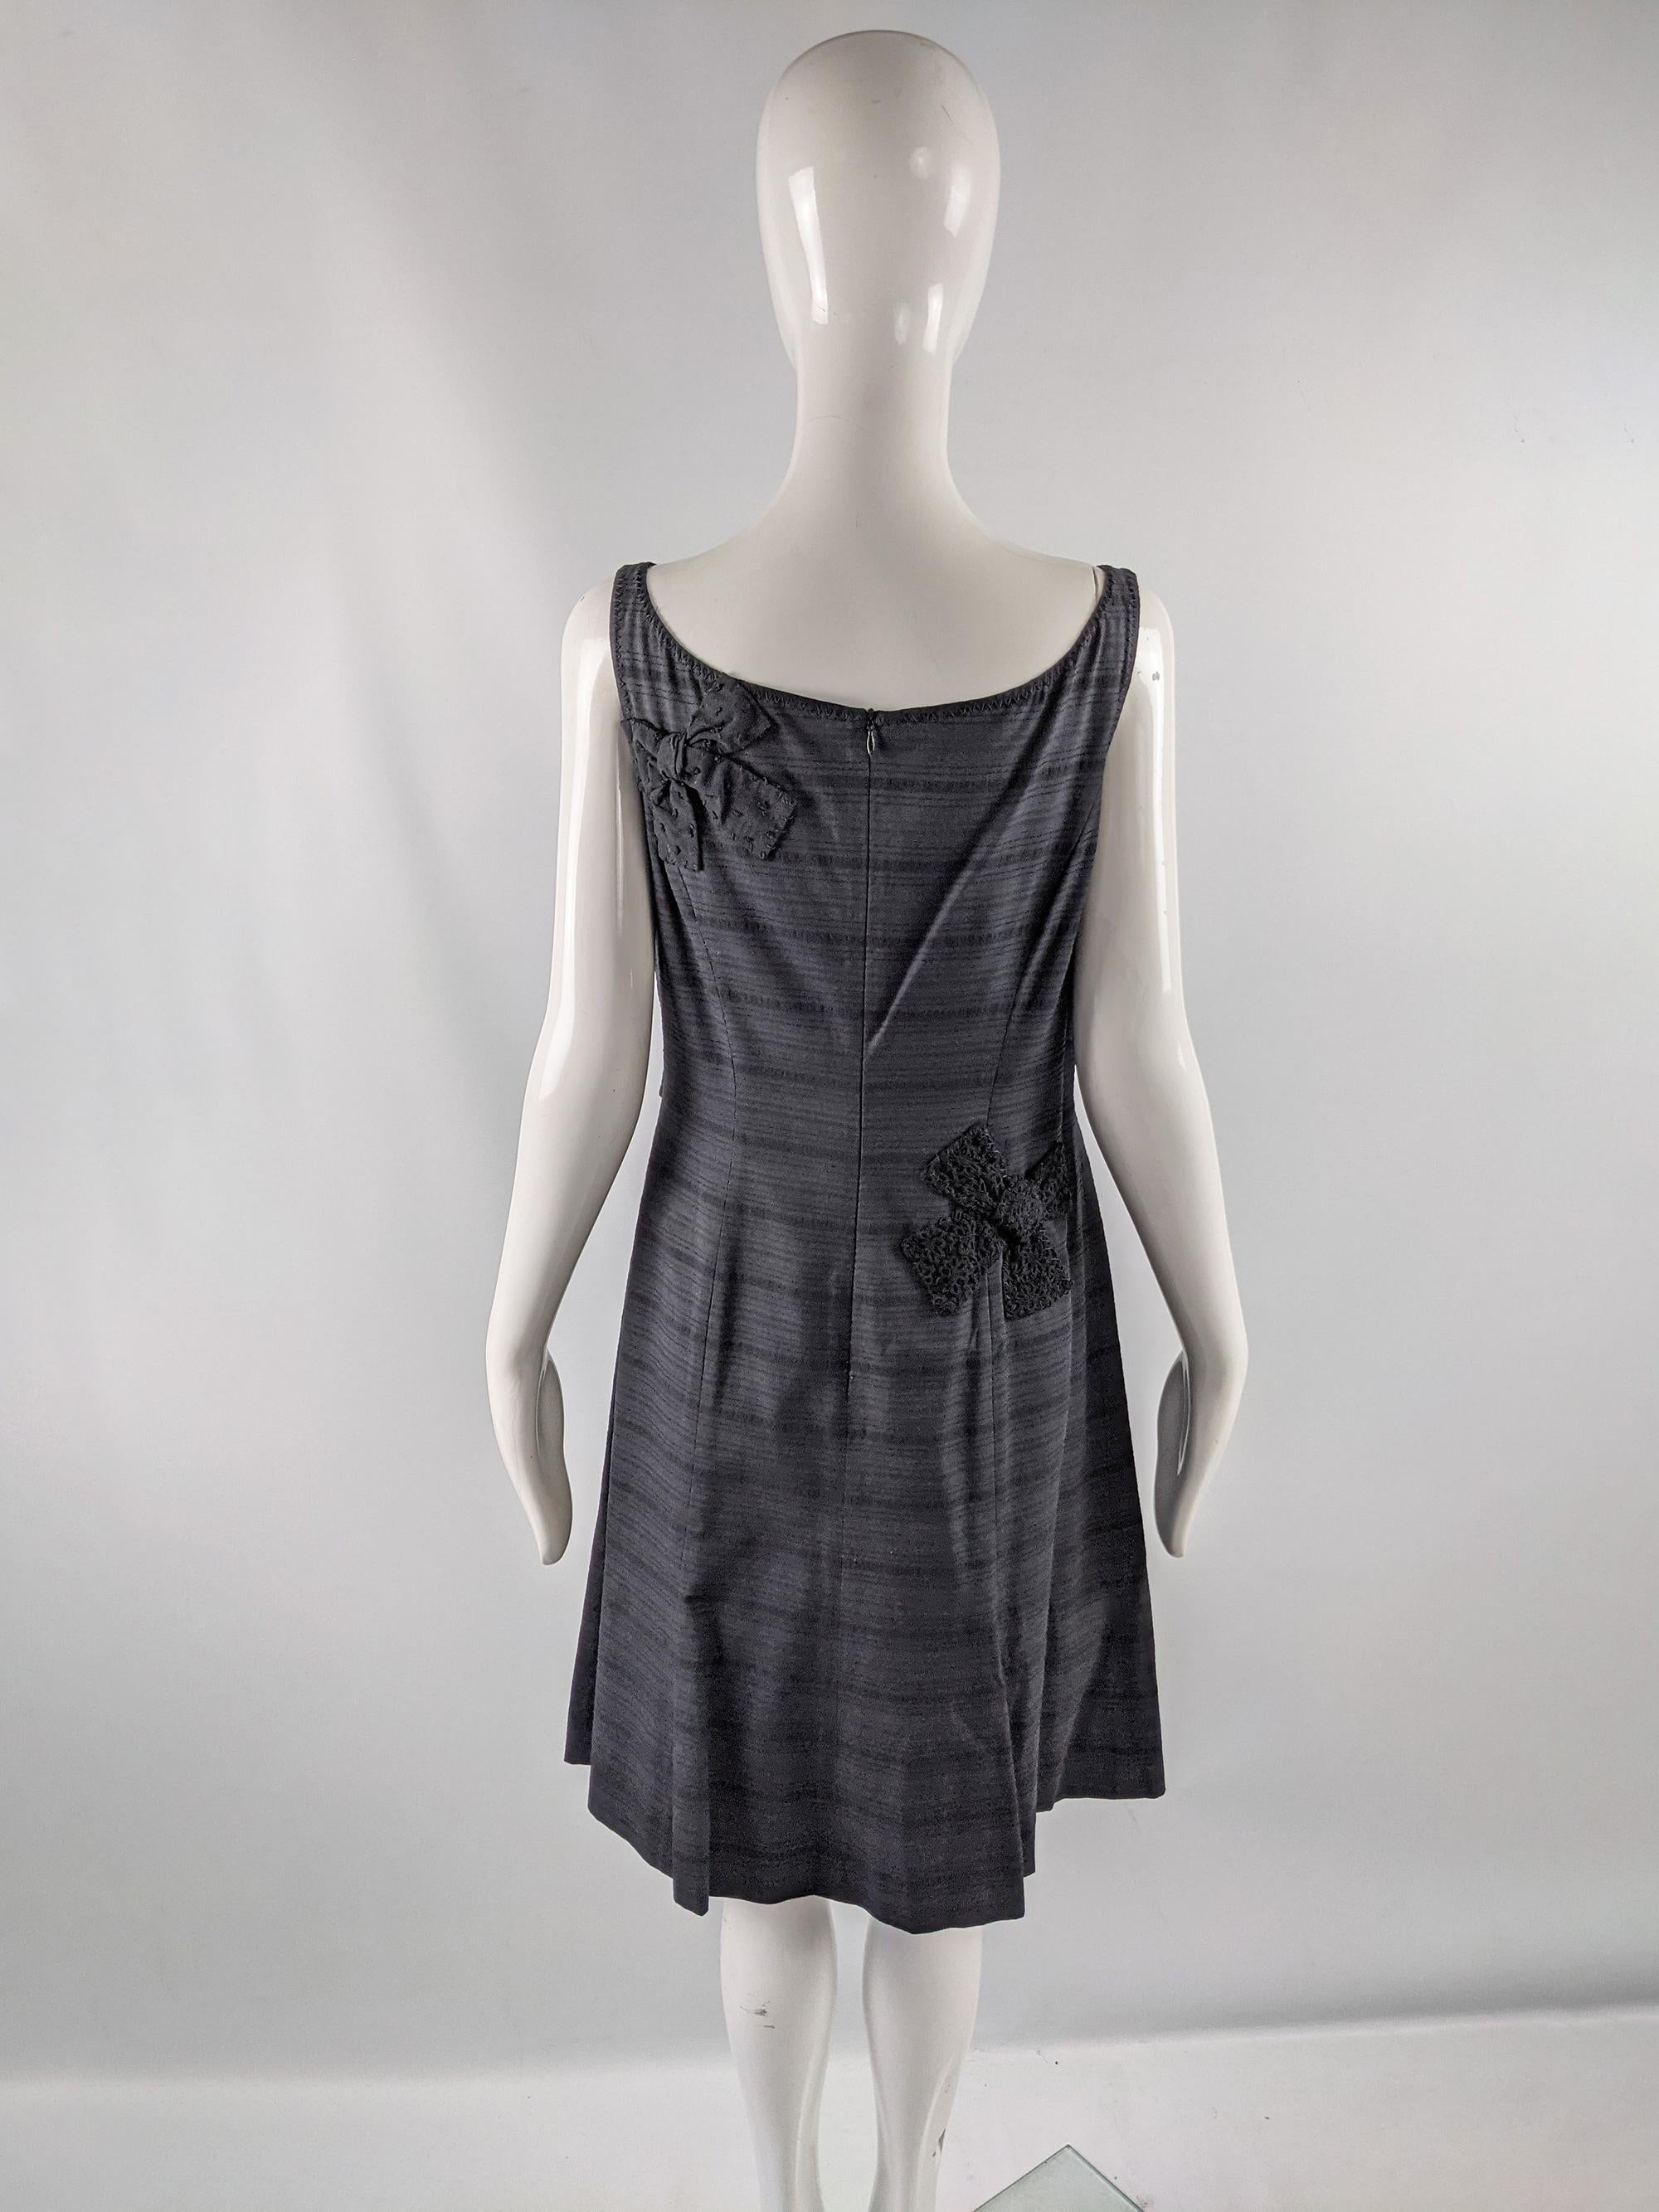 Moschino Vintage 90s Cute Black Bow Appliqué Sleeveless Party Dress, 1990s 4